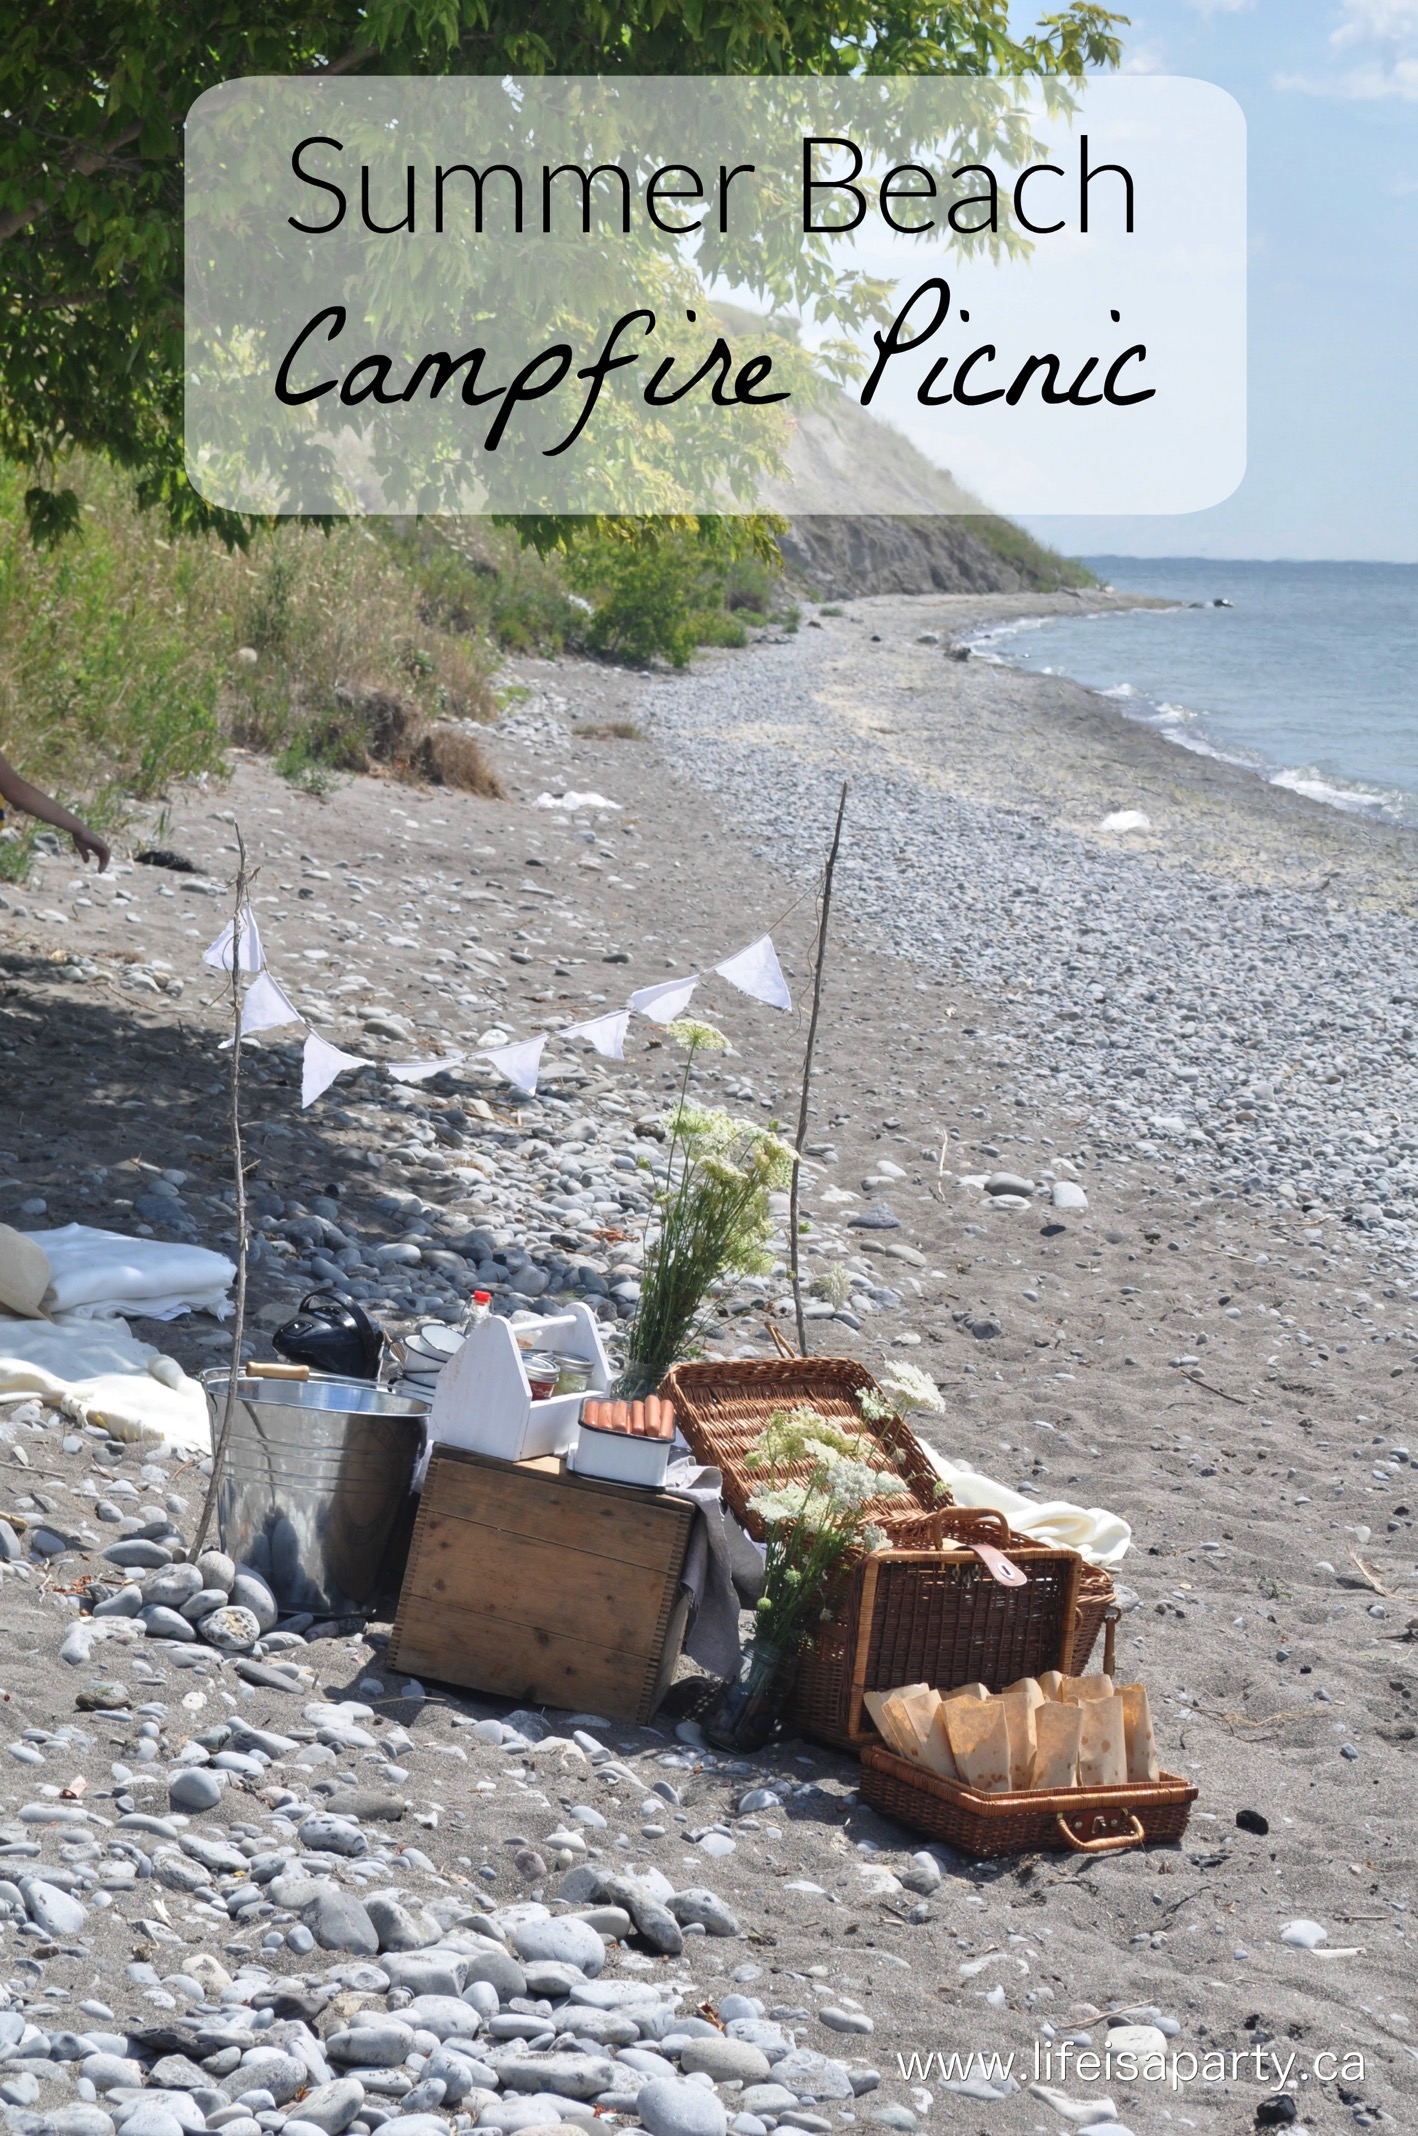 Summer Beach Campfire Picnic: A fun menu of hotdogs, smores, and campfire baked apples, along with some simple decor make the perfect beach campfire picnic.